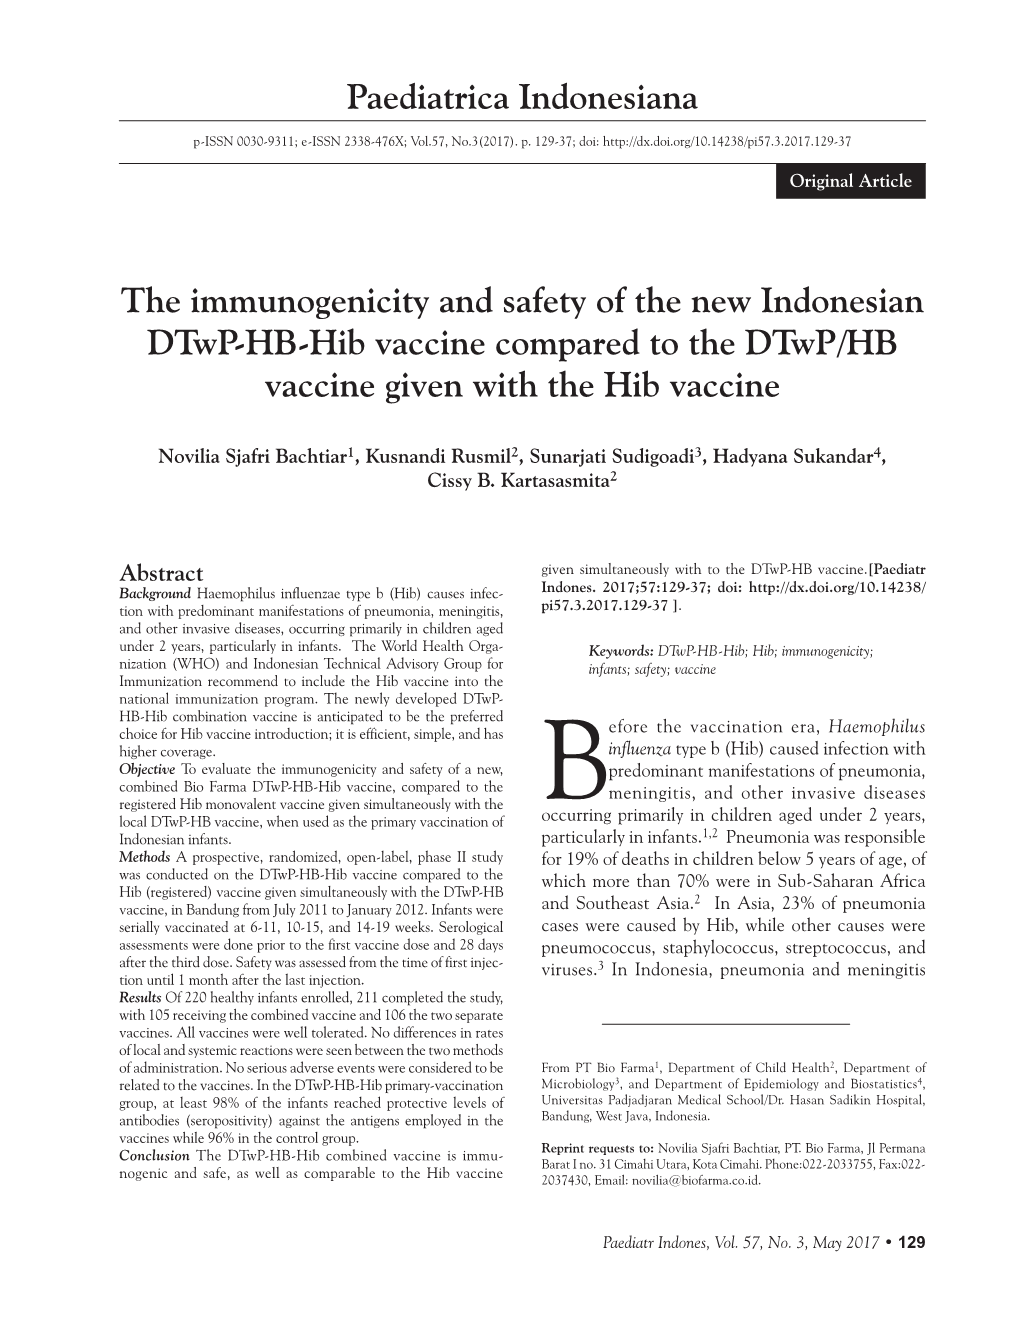 The Immunogenicity and Safety of the New Indonesian Dtwp-HB-Hib Vaccine Compared to the Dtwp/HB Vaccine Given with the Hib Vaccine